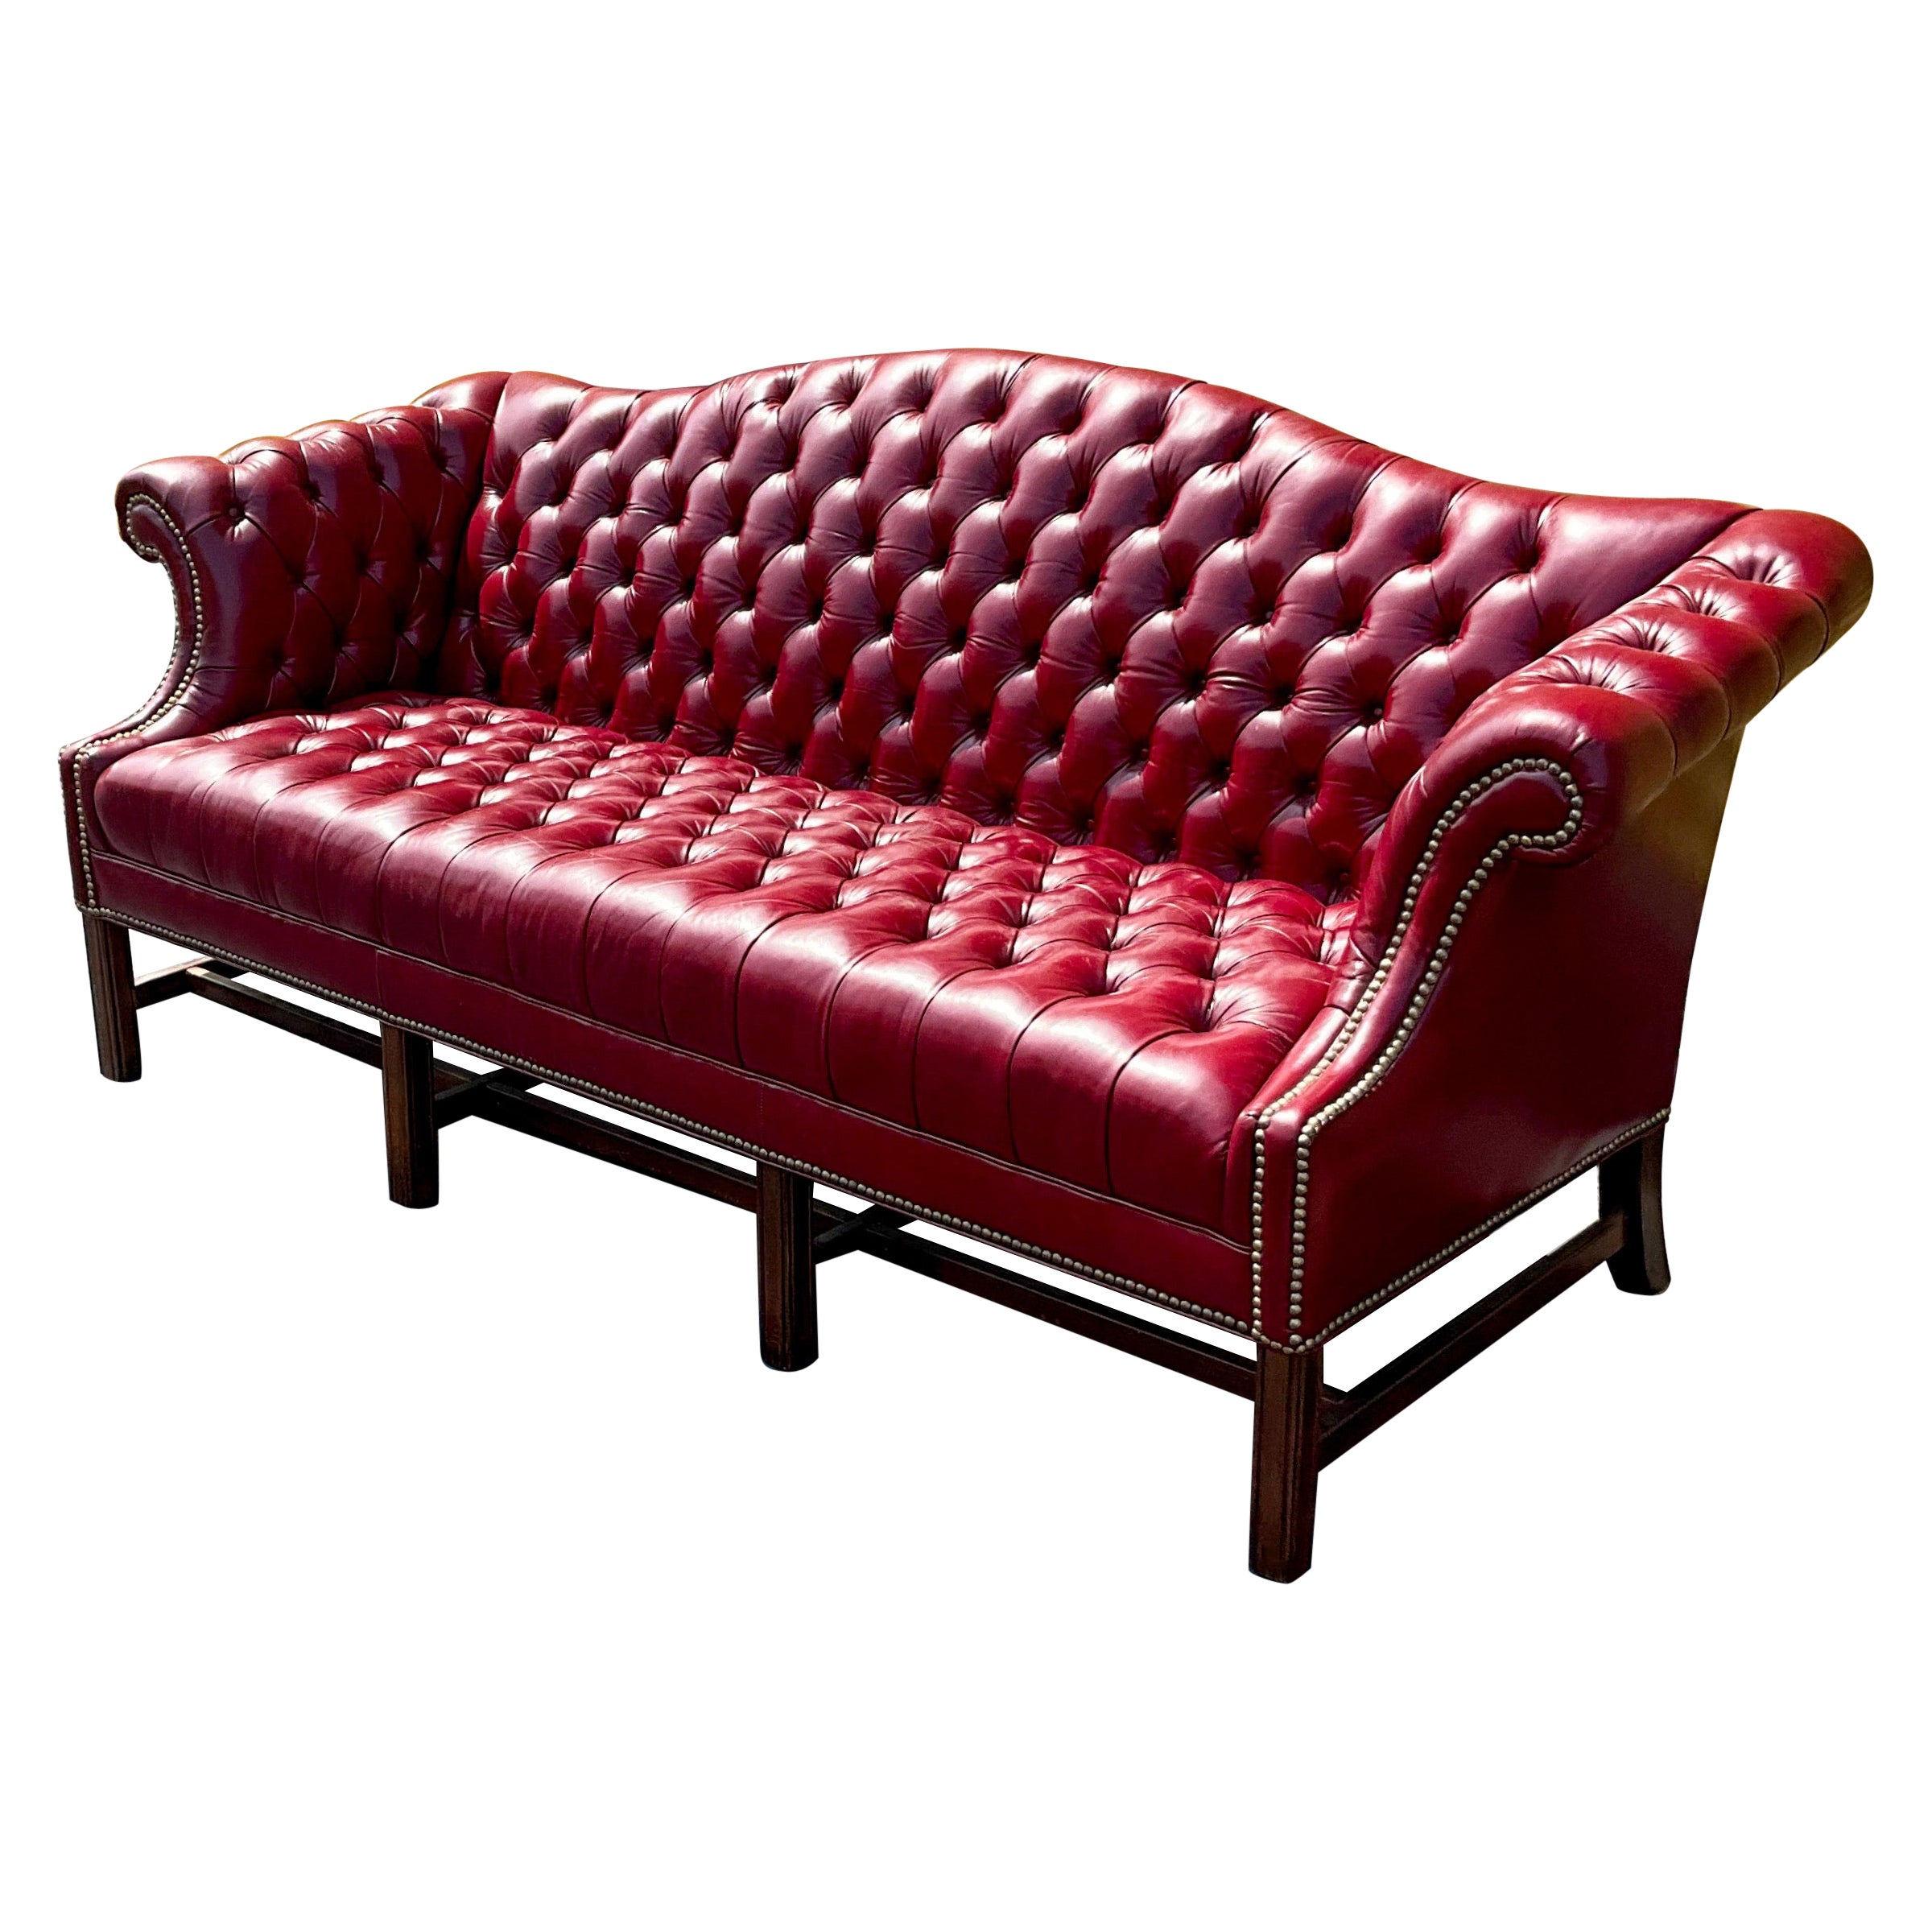 English Style Red Leather Chesterfield Style Camelback Sofa W/ Brass Nailheads 